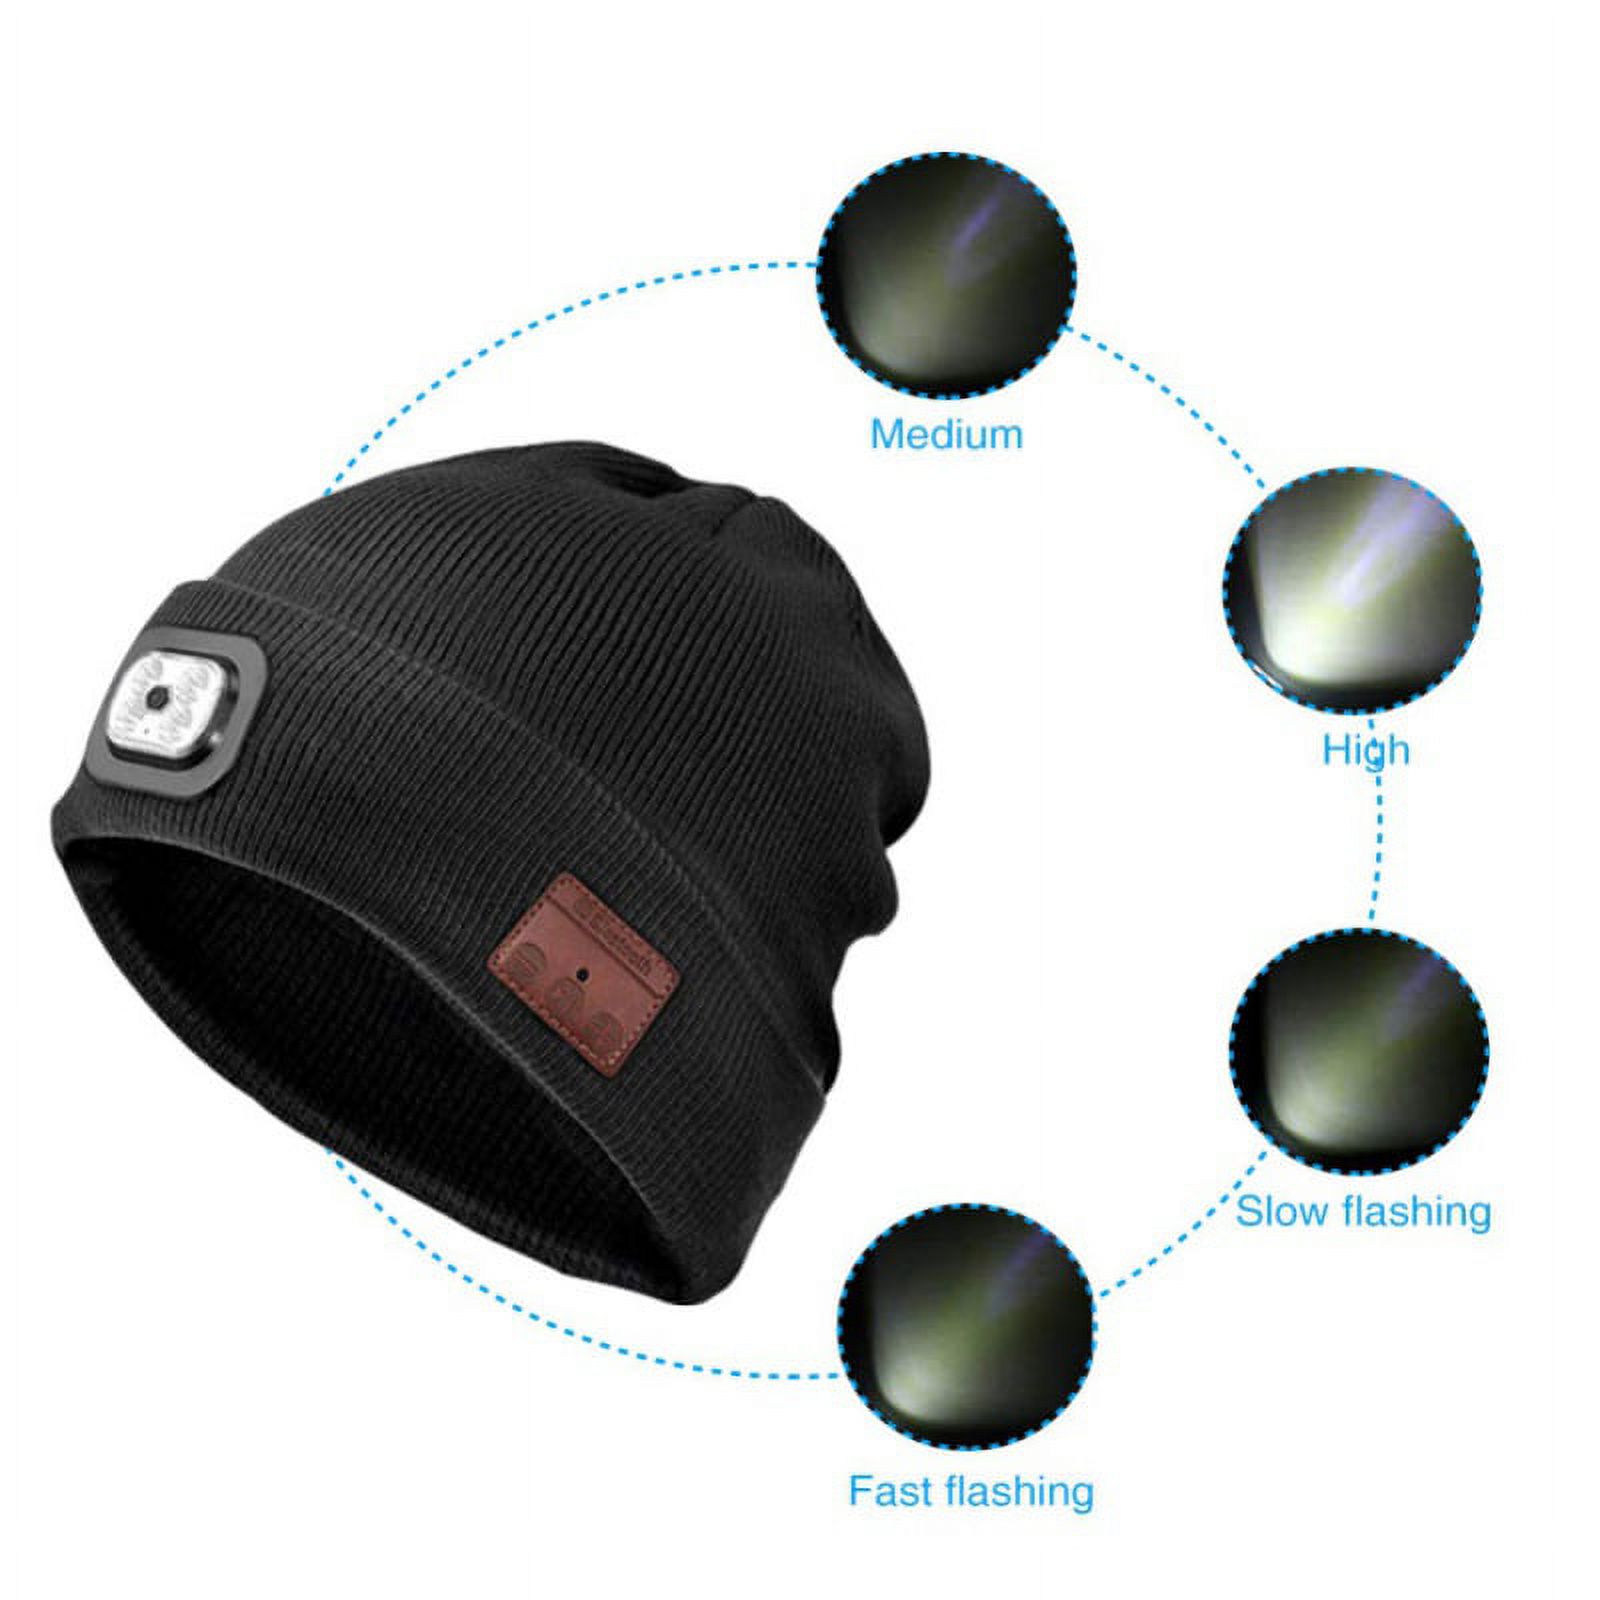 Poseca Bluetooth Beanie Hat LED Beanie Hat, Unisex Wireless Headphone Beanie USB Rechargeable Lighted Cap with Built-in HD Stereo Speakers & Mic - image 3 of 7